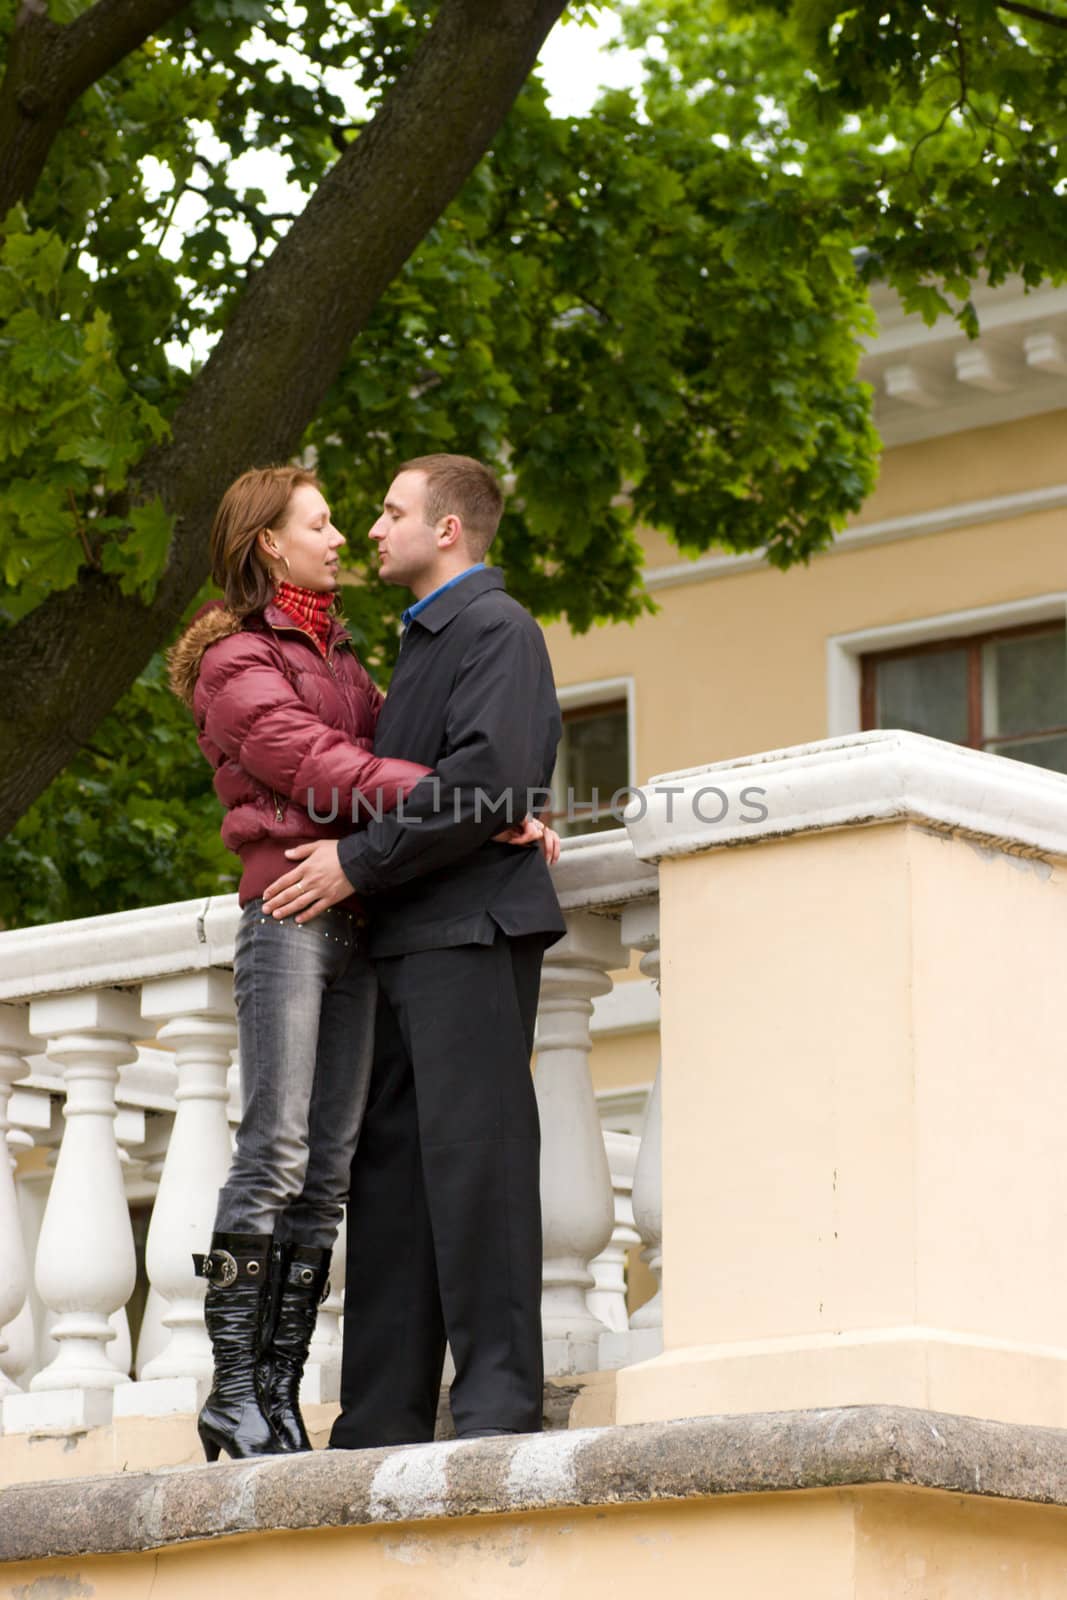 Talking couple standing together outdoors in spring